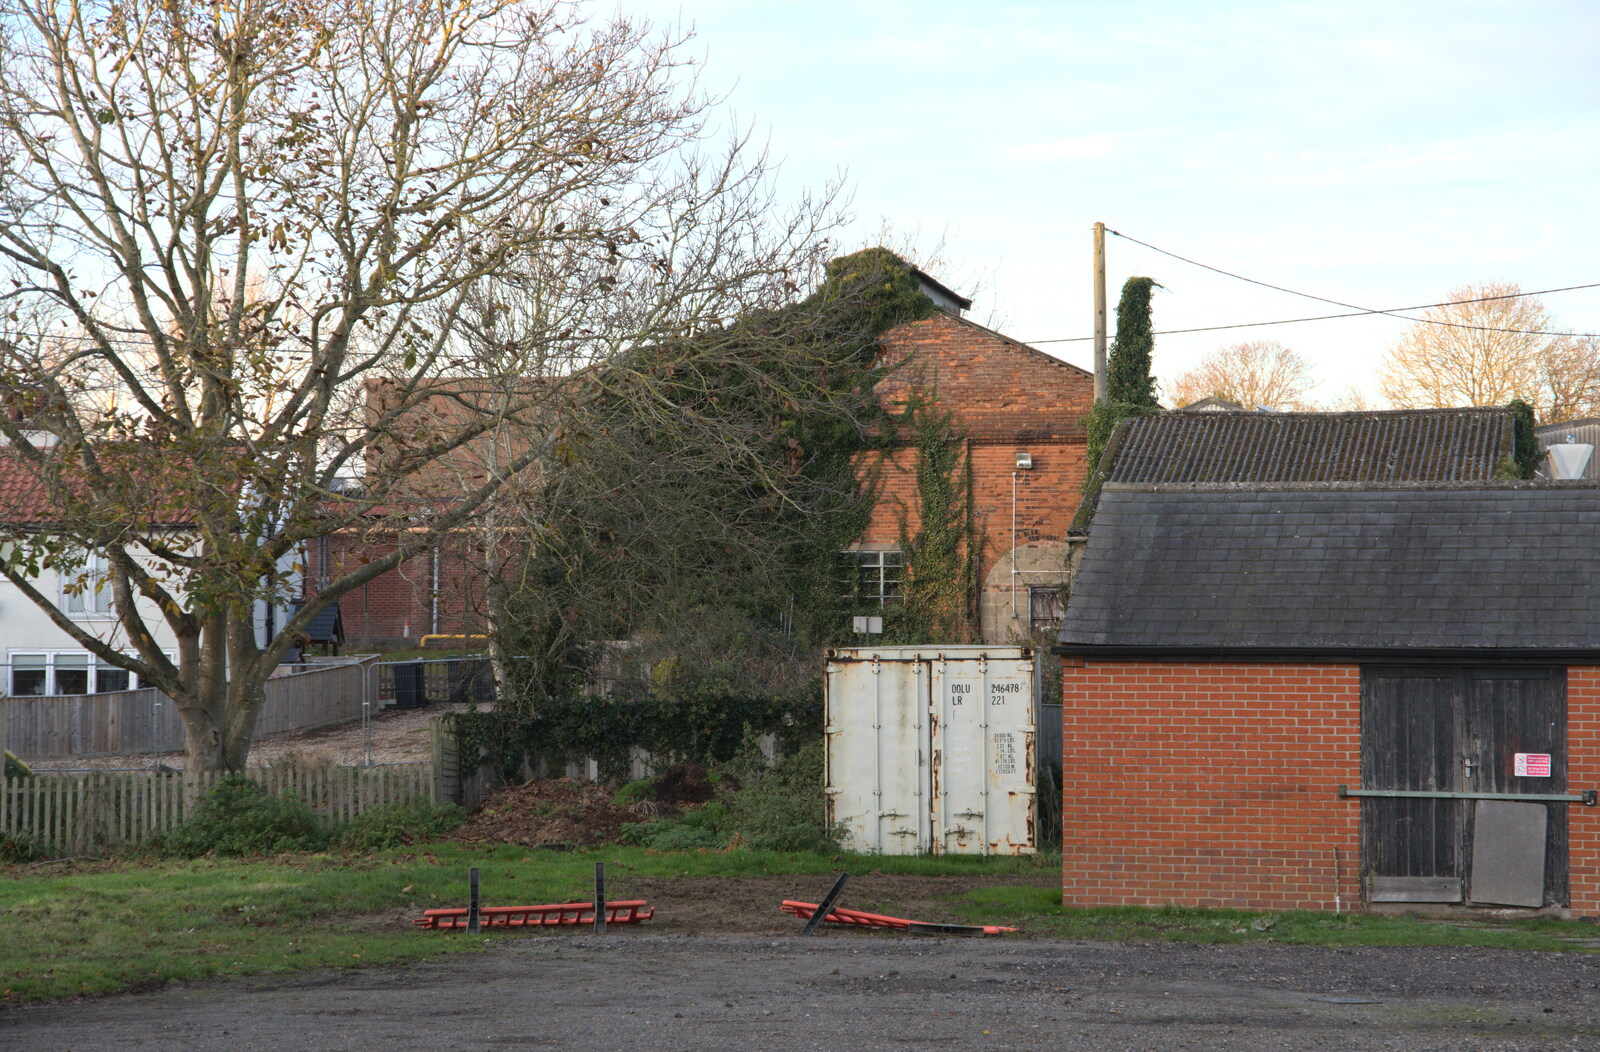 The back of the old gas works from The Dereliction of Eye, Suffolk - 22nd November 2020